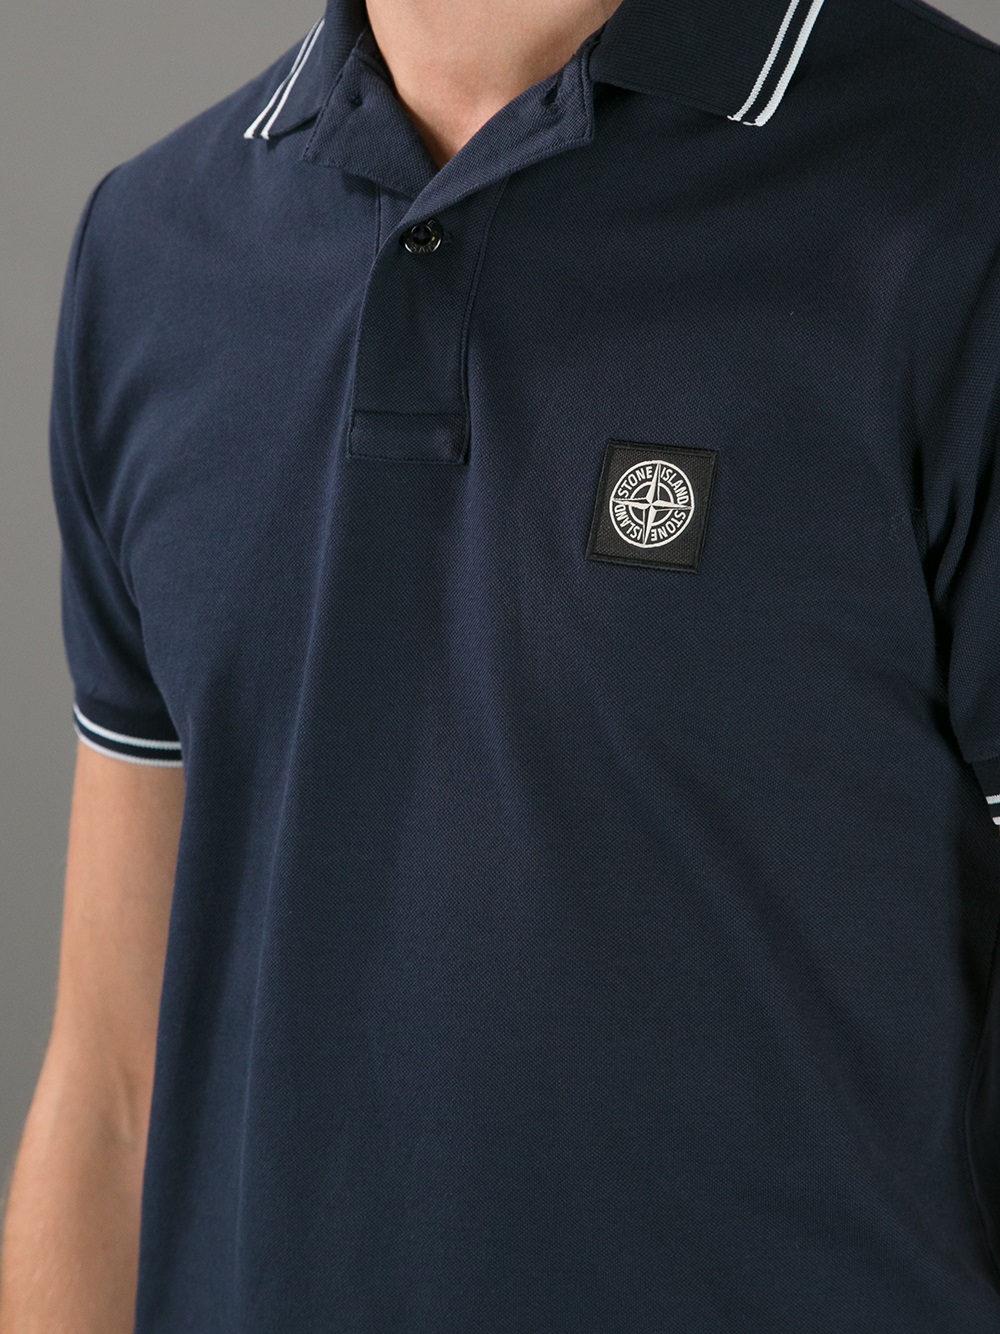 Stone Island Classic Polo Shirt in Navy (Blue) for Men - Lyst